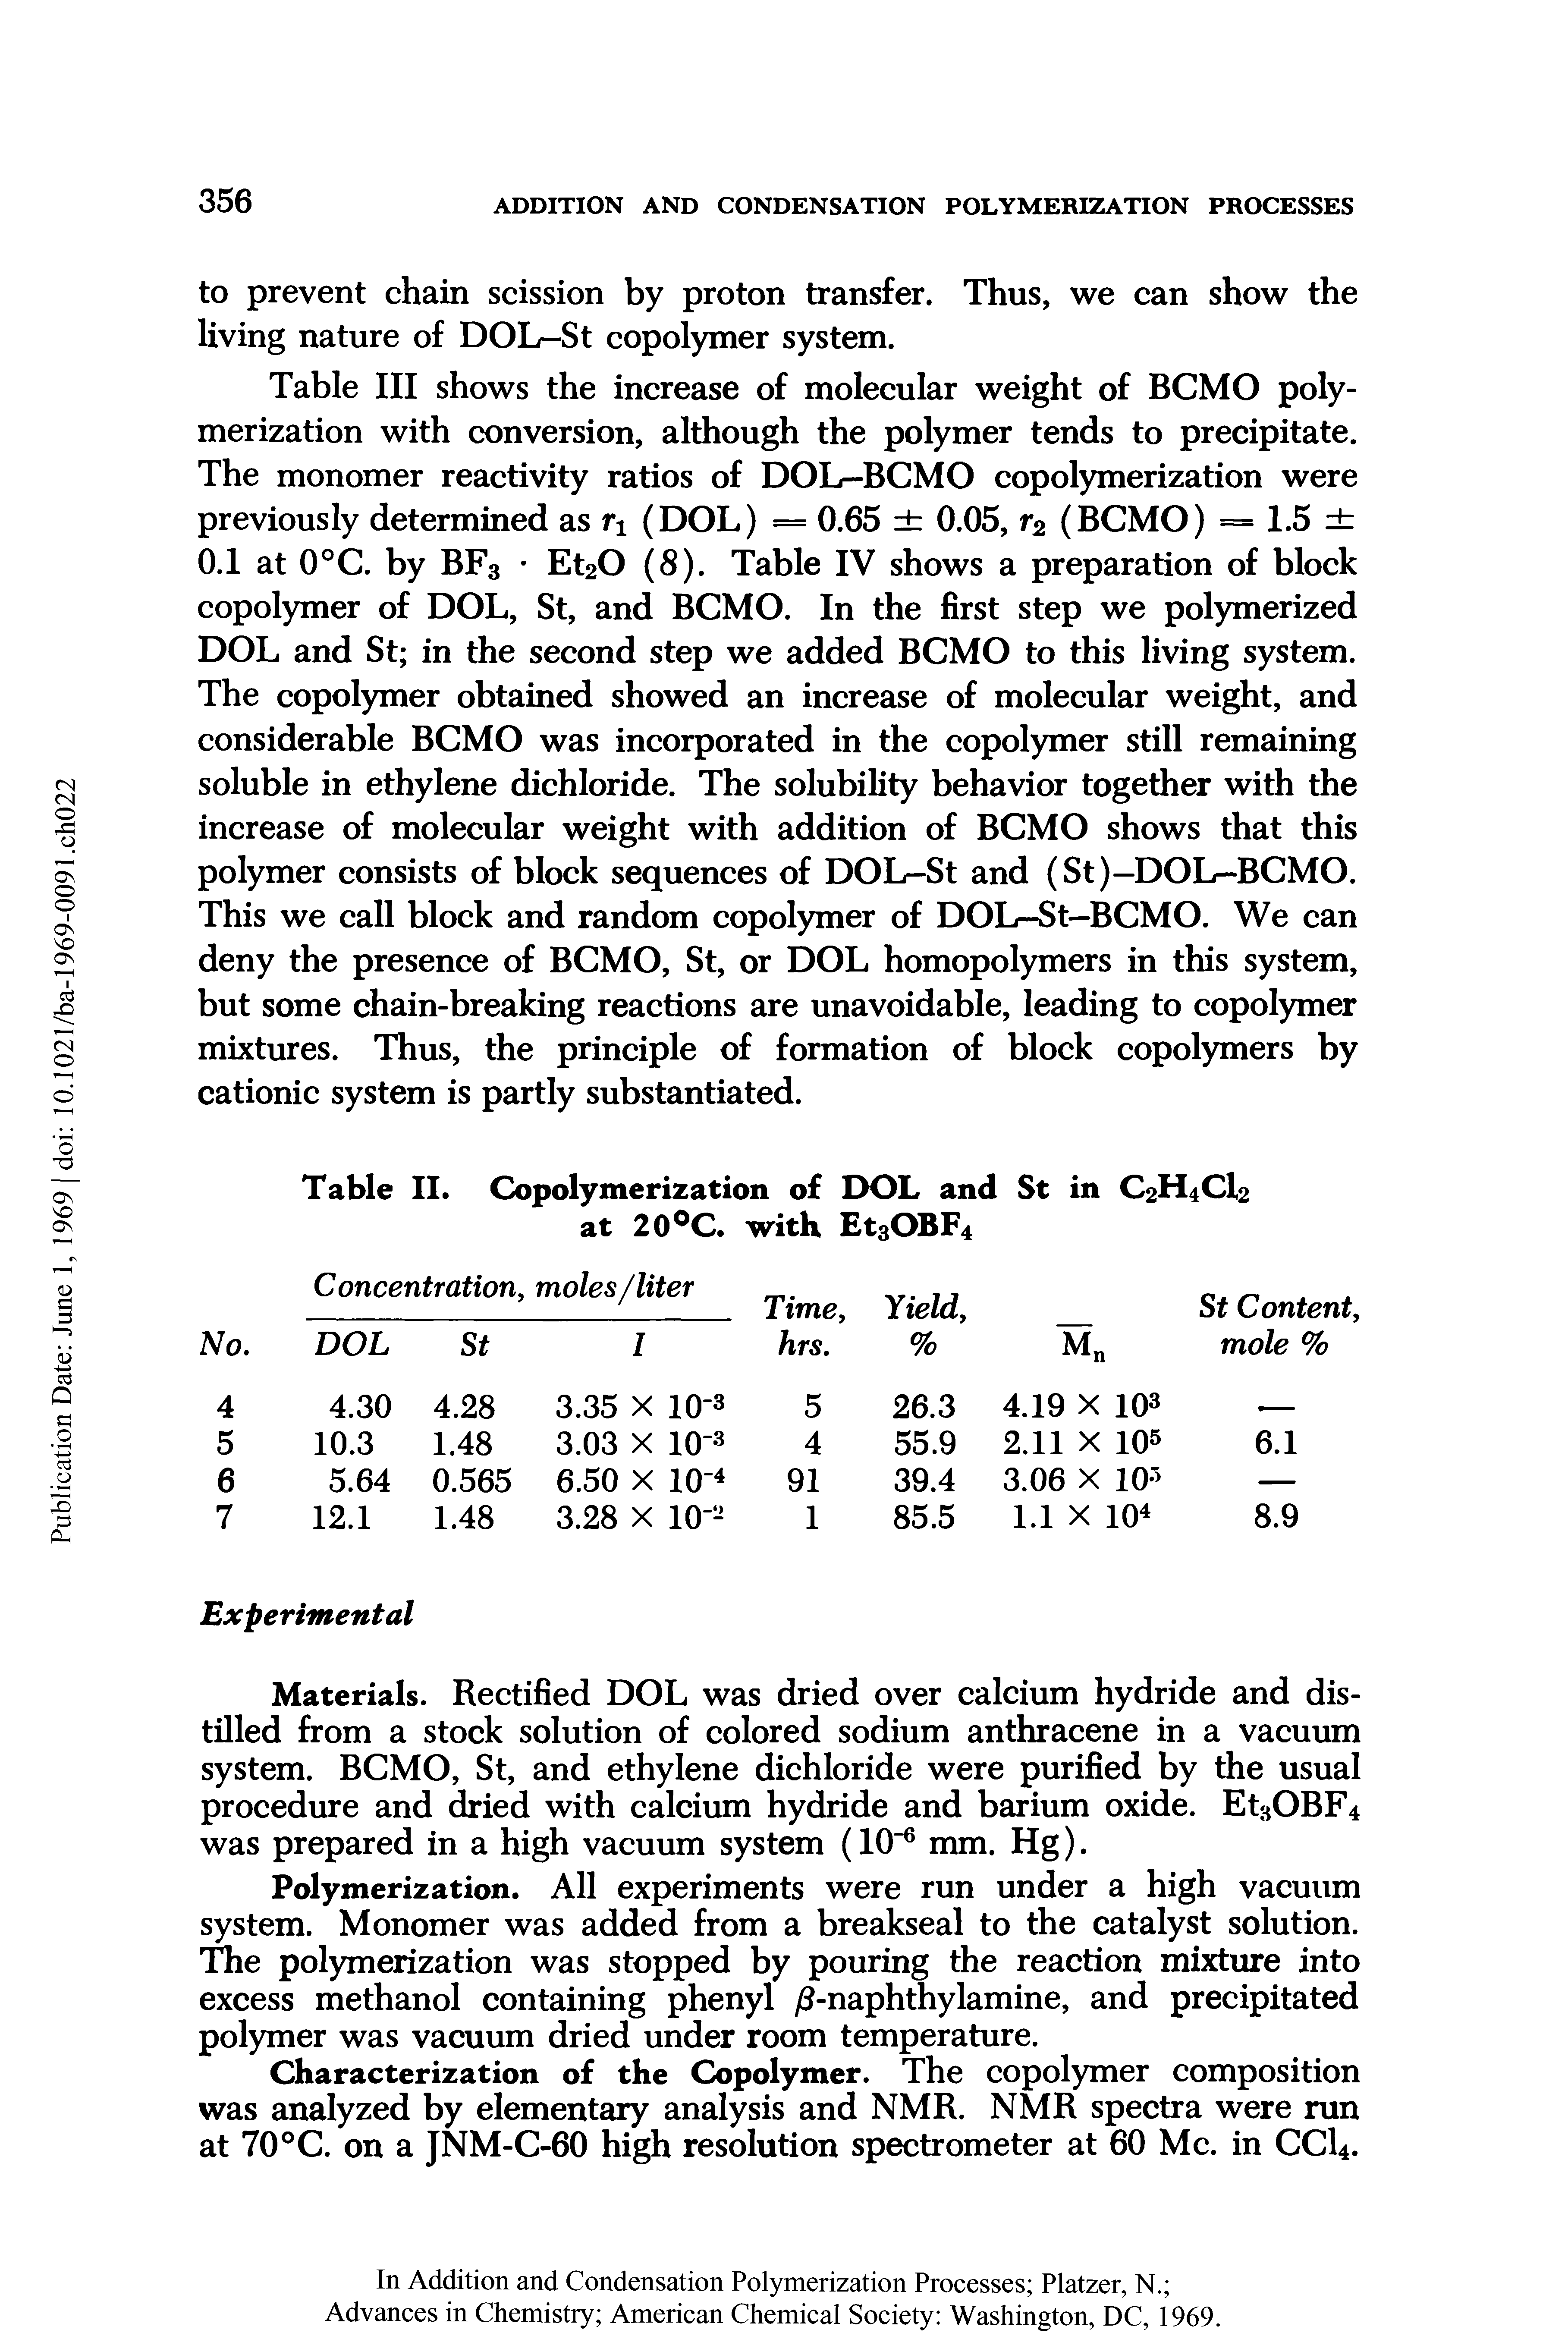 Table III shows the increase of molecular weight of BCMO polymerization with conversion, although the polymer tends to precipitate. The monomer reactivity ratios of DOL-BCMO copolymerization were previously determined as rx (DOL) = 0.65 0.05, r2 (BCMO) = 1.5 0.1 at 0°C. by BF3 Et20 (8). Table IV shows a preparation of block copolymer of DOL, St, and BCMO. In the first step we polymerized DOL and St in the second step we added BCMO to this living system. The copolymer obtained showed an increase of molecular weight, and considerable BCMO was incorporated in the copolymer still remaining soluble in ethylene dichloride. The solubility behavior together with the increase of molecular weight with addition of BCMO shows that this polymer consists of block sequences of DOL-St and (St)-DOL-BCMO. This we call block and random copolymer of DOL-St—BCMO. We can deny the presence of BCMO, St, or DOL homopolymers in this system, but some chain-breaking reactions are unavoidable, leading to copolymer mixtures. Thus, the principle of formation of block copolymers by cationic system is partly substantiated.